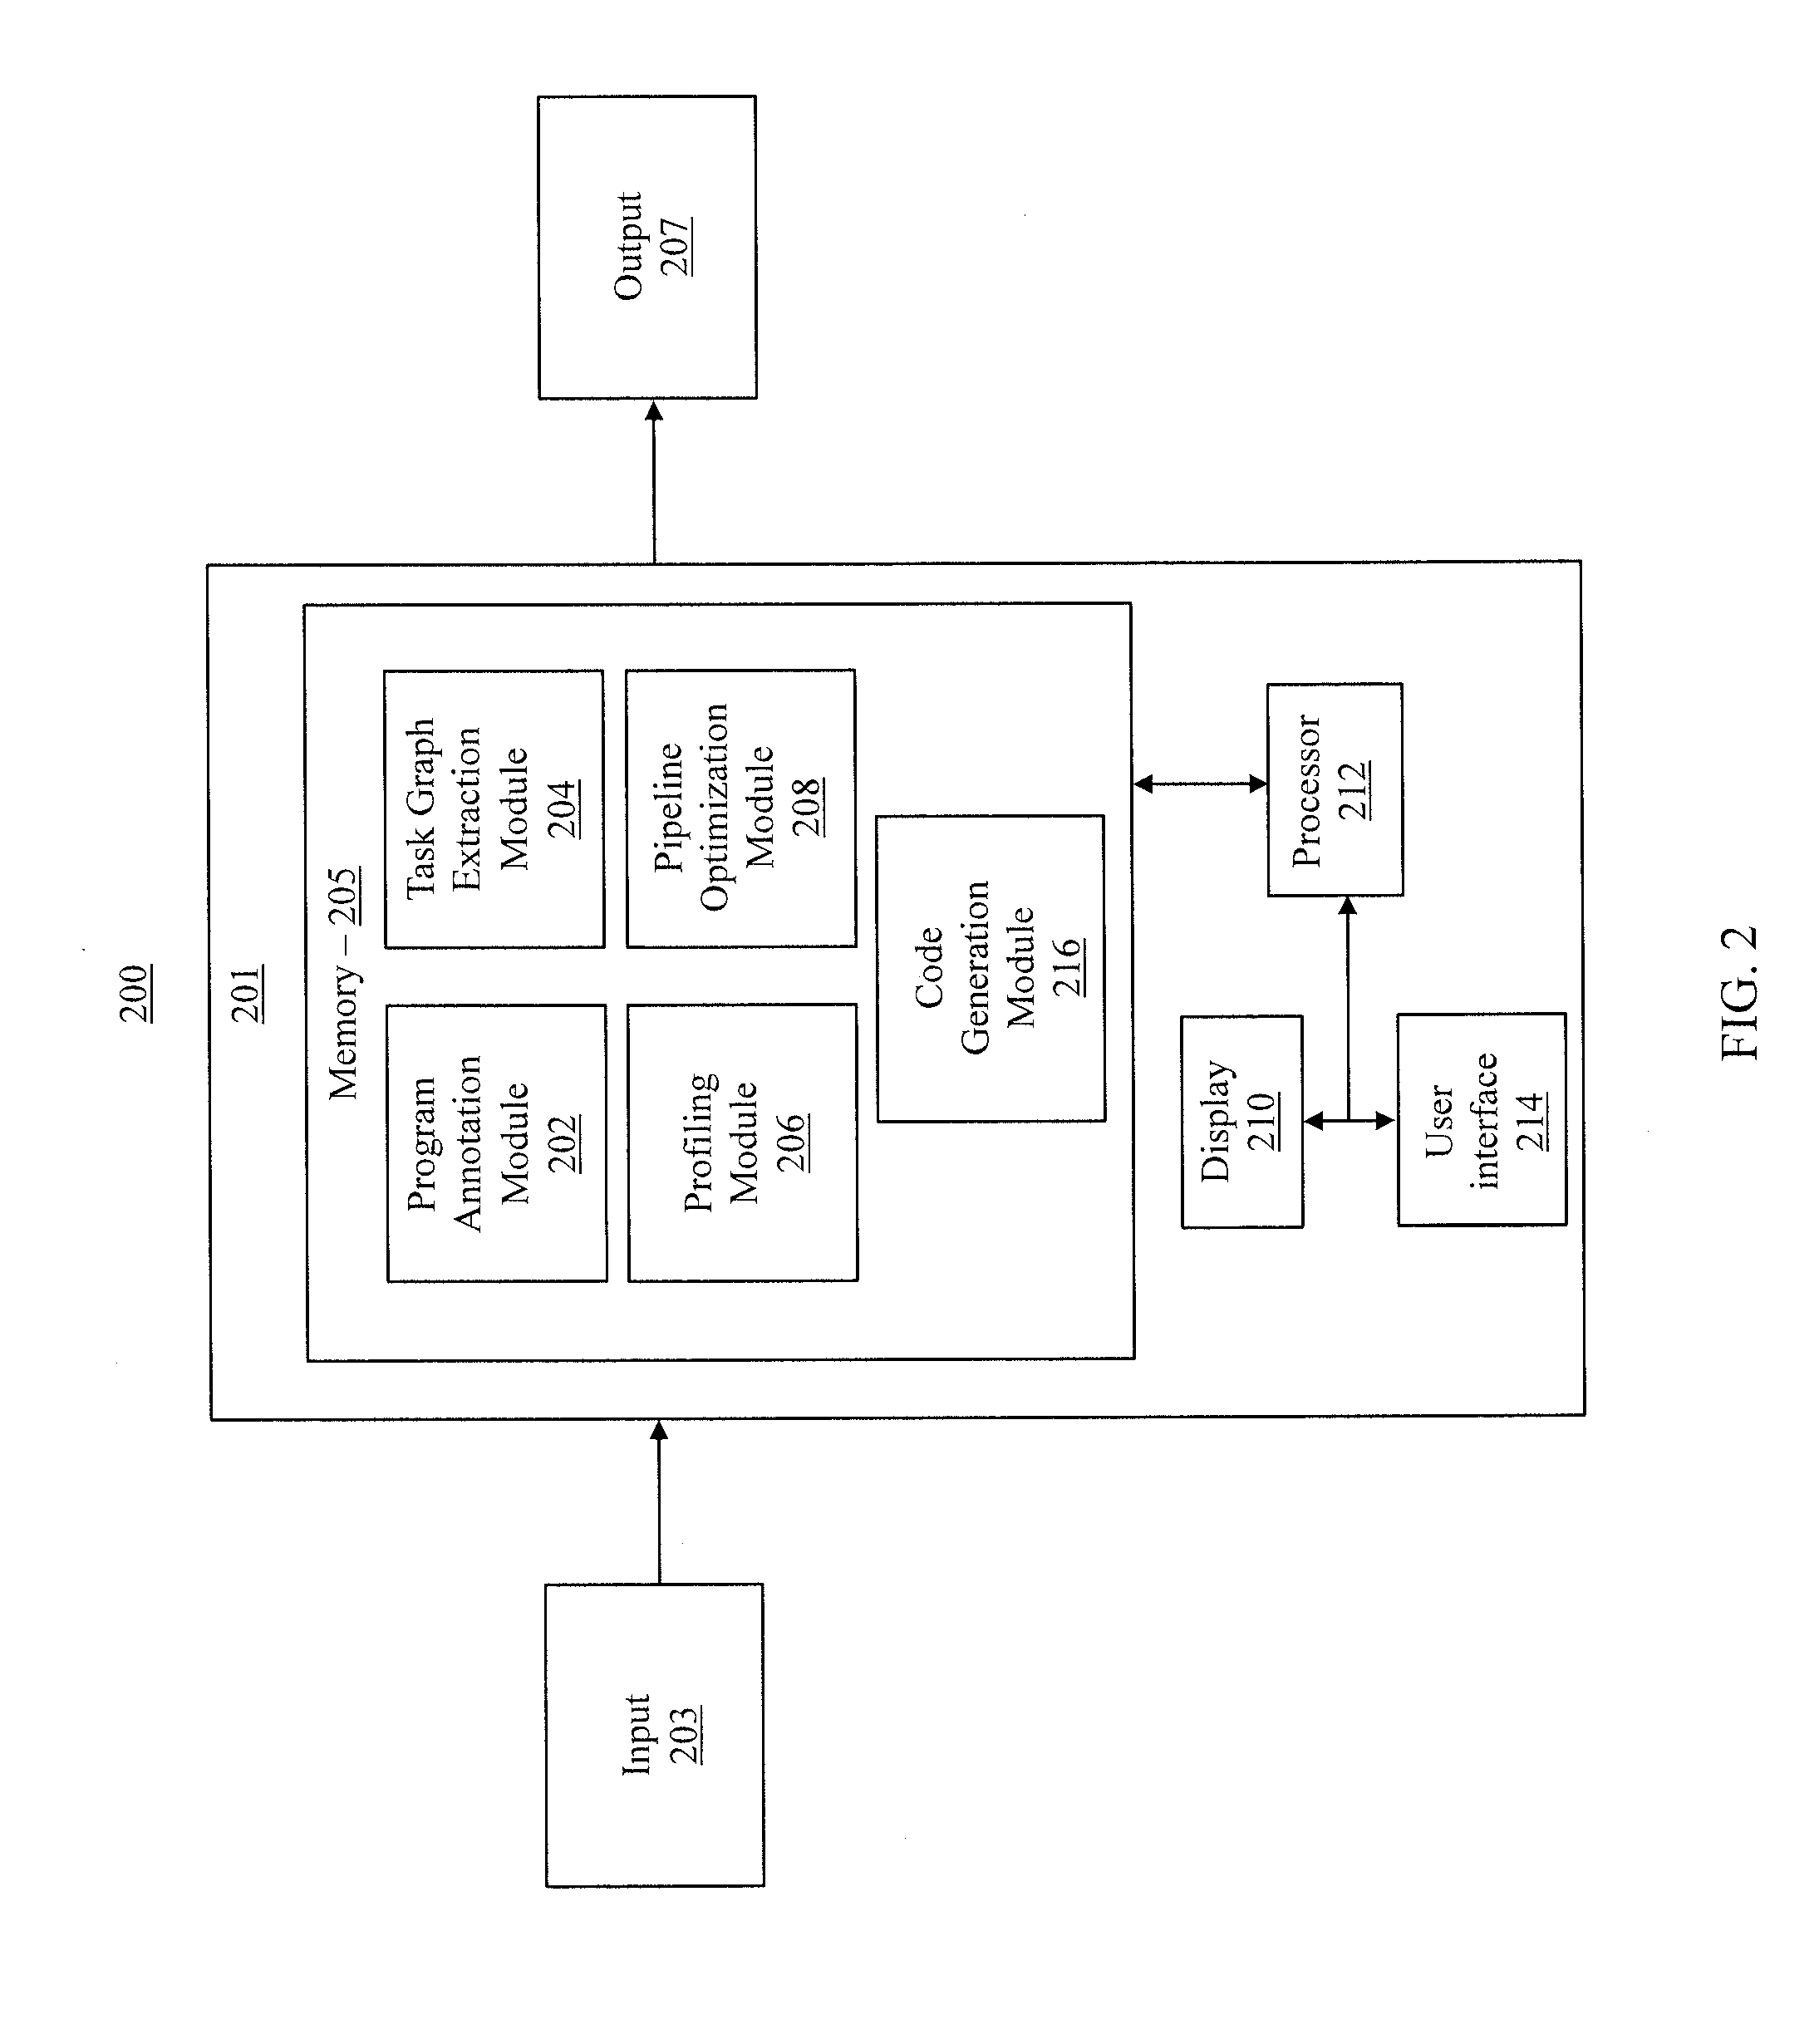 Automatic pipelining framework for heterogeneous parallel computing systems